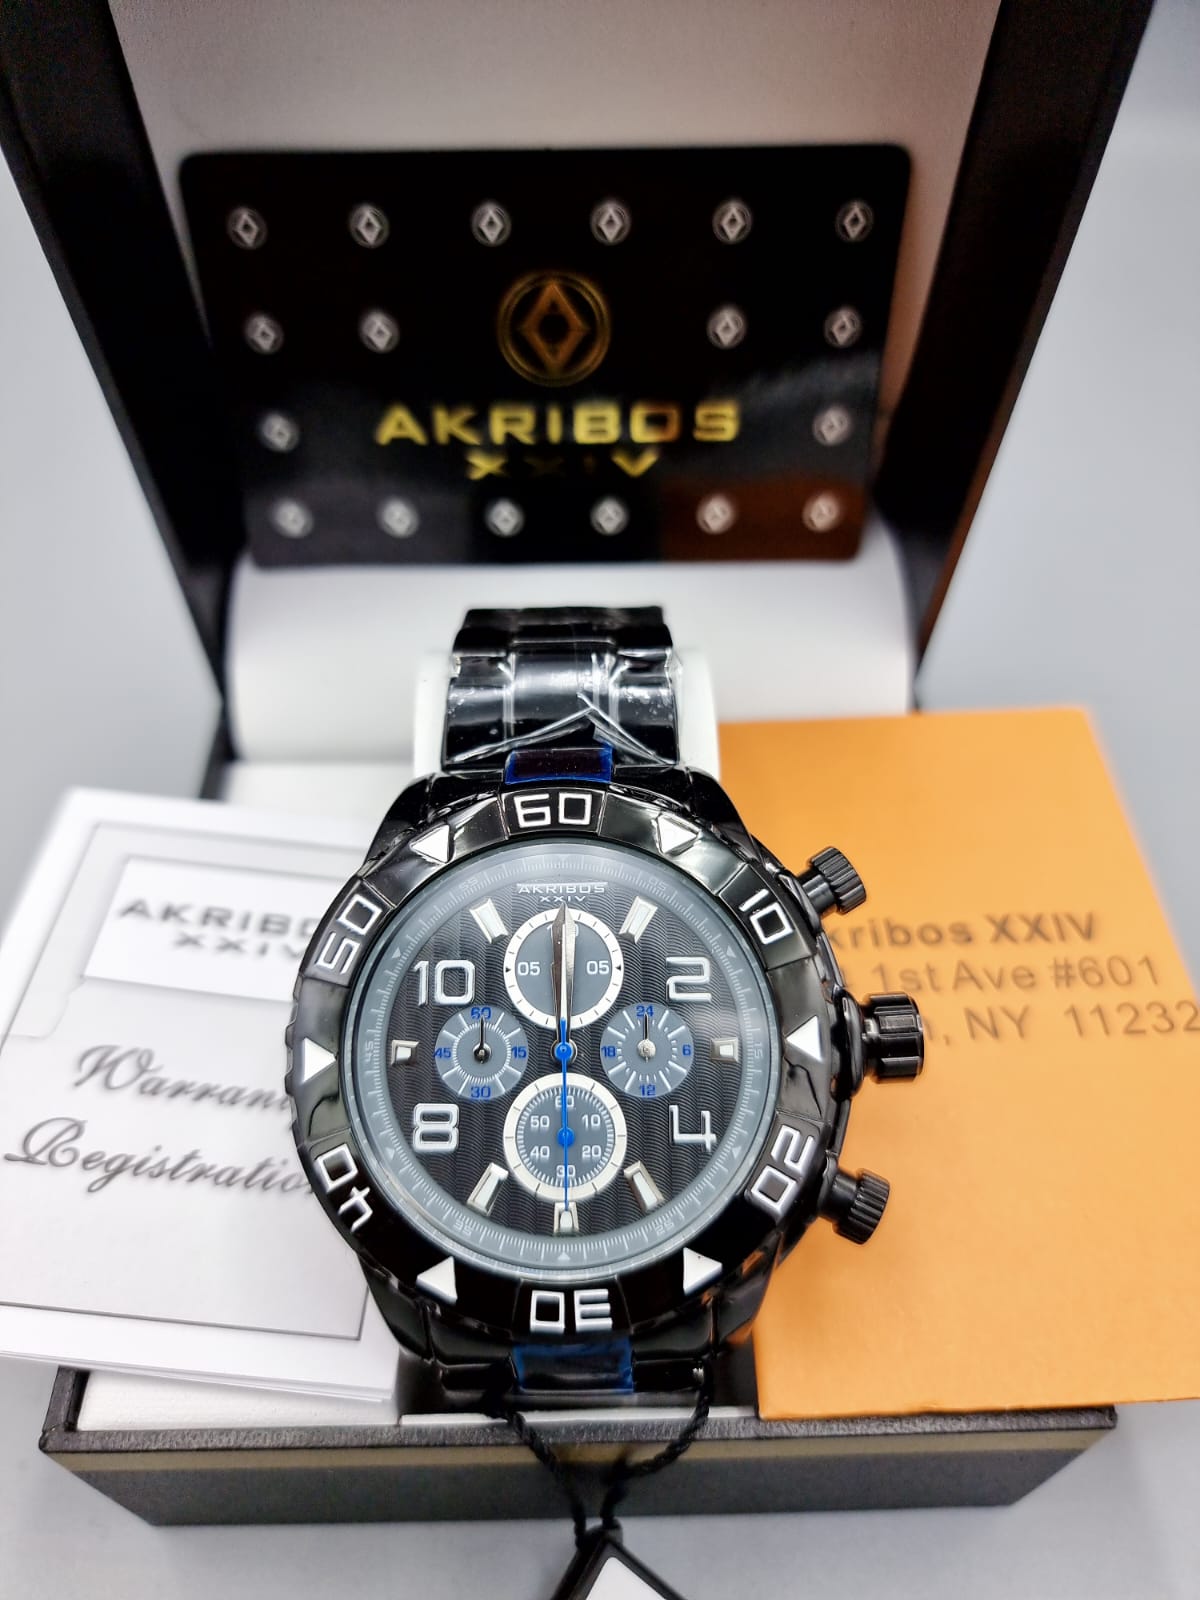 Akribos XXIV Men's Multifunction Watch - 4 Subdials Day, Date and GMT - Wave Textured Dial on Stainless Steel Bracelet - AK814BK